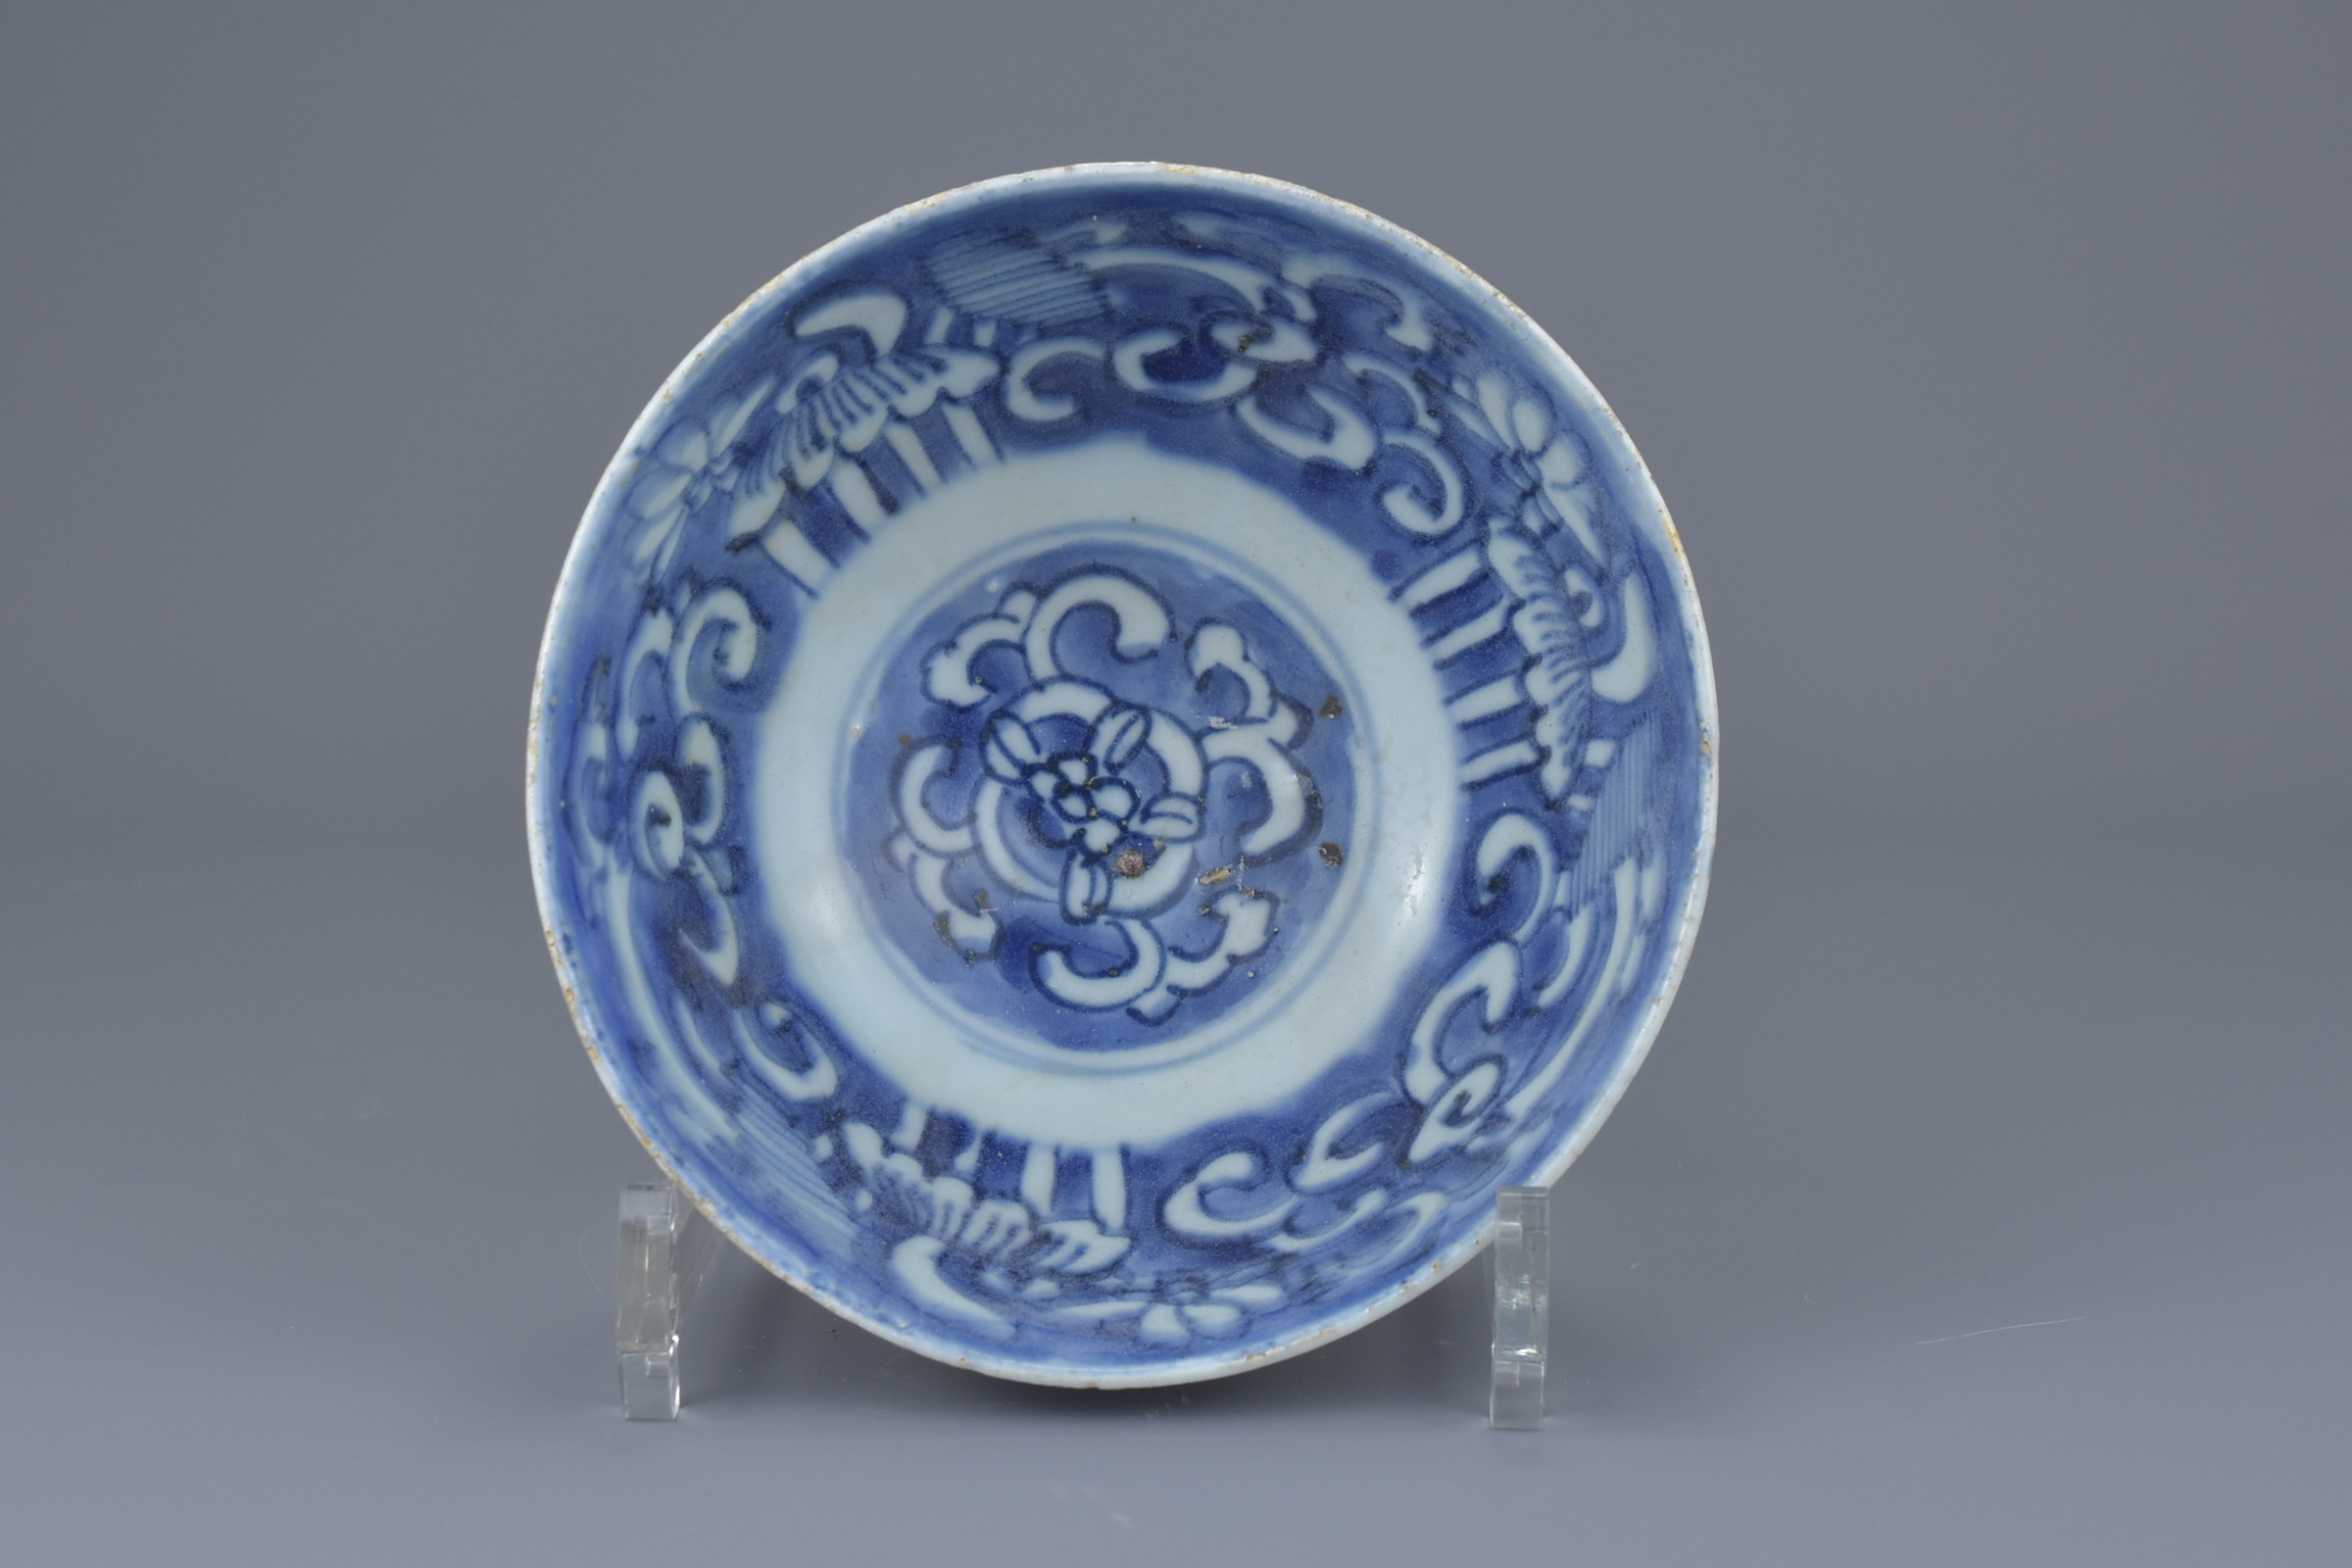 A Fine Chinese Ming Dynasty Blue & White Porcelain Bowl – Jiajing reign - Image 6 of 7